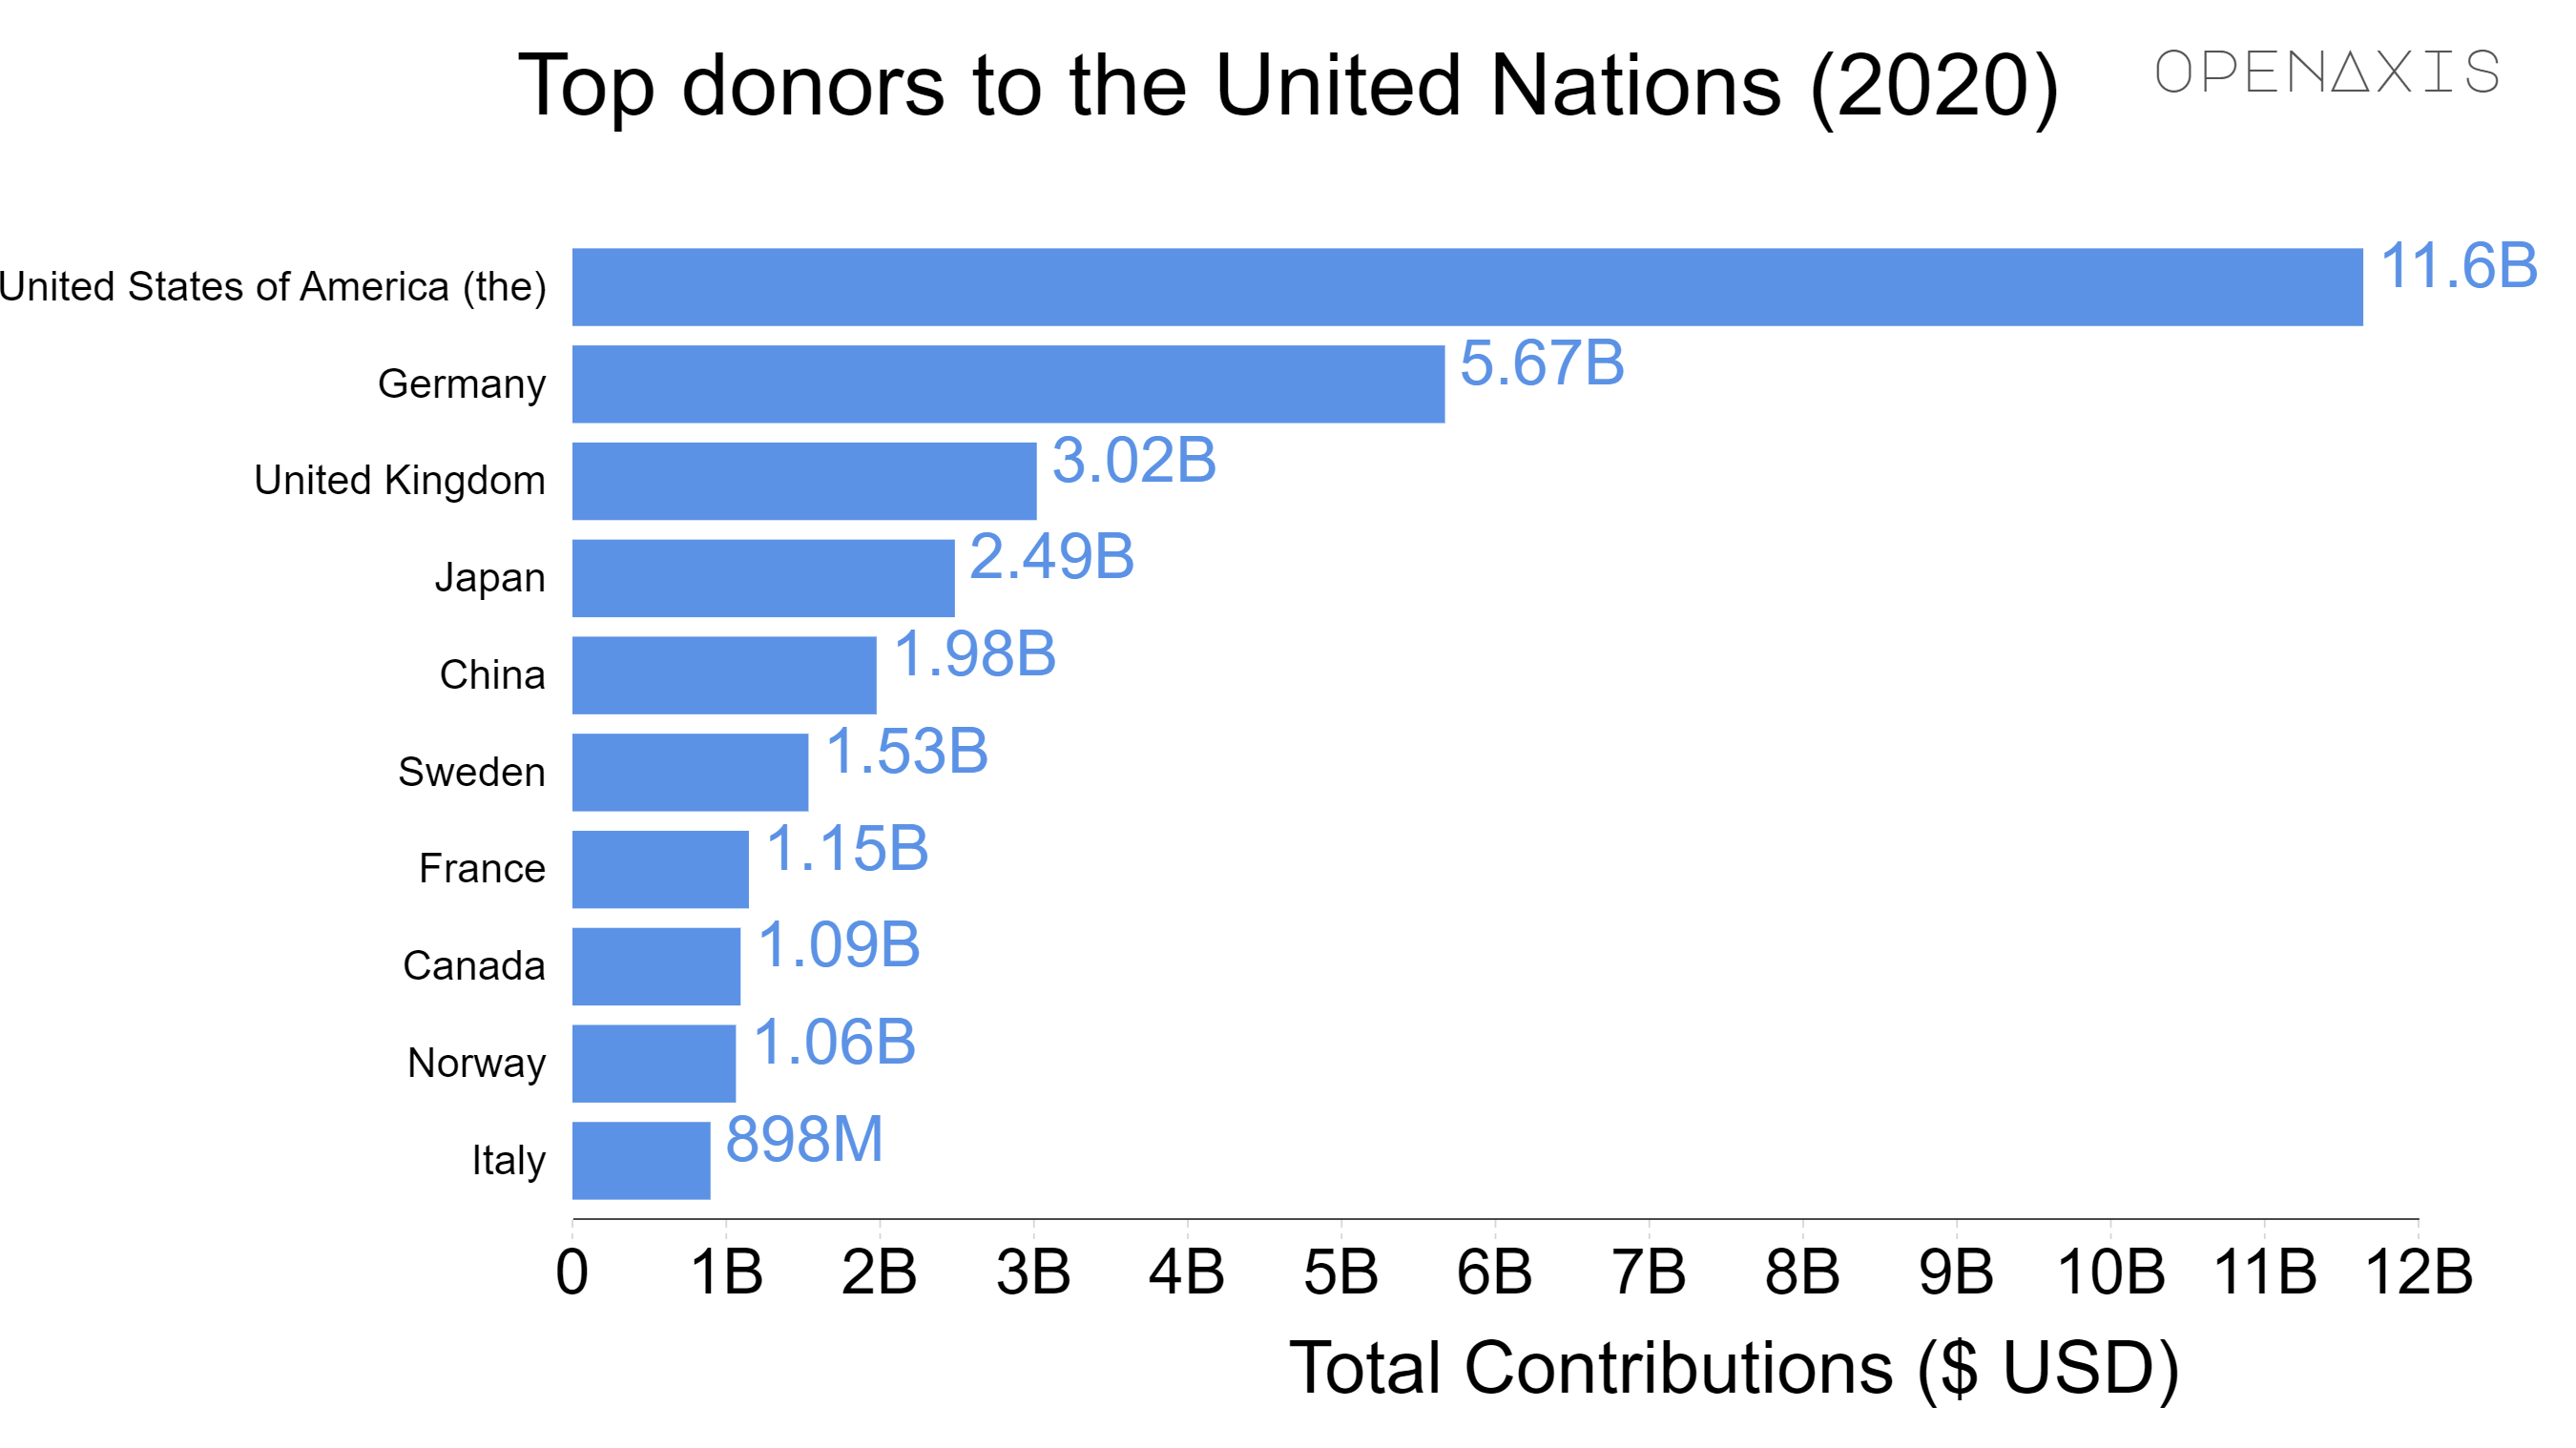 <p>Revenue by Government Donor and by Financing Instrument</p><p><br /></p><p>Most of the top donors are from the Permanent 5 Members of the Security Council (P5), except Russia, which only has the 17th highest total contribution in $USD. </p><p><br /></p><p><span data-index="0" data-denotation-char data-id="0" data-value="&lt;a href=&quot;/search?q=%23internationalorgs&quot; target=_self&gt;#internationalorgs" data-link="/search?q=%23internationalorgs">﻿<span contenteditable="false"><span></span><a href="/search?q=%23internationalorgs" target="_self">#internationalorgs</a></span>﻿</span> <span data-index="0" data-denotation-char data-id="0" data-value="&lt;a href=&quot;/search?q=%23multilateralism&quot; target=_self&gt;#multilateralism" data-link="/search?q=%23multilateralism">﻿<span contenteditable="false"><span></span><a href="/search?q=%23multilateralism" target="_self">#multilateralism</a></span>﻿</span> <span data-index="0" data-denotation-char data-id="0" data-value="&lt;a href=&quot;/search?q=%23foreignaid&quot; target=_self&gt;#foreignaid" data-link="/search?q=%23foreignaid">﻿<span contenteditable="false"><span></span><a href="/search?q=%23foreignaid" target="_self">#foreignaid</a></span>﻿</span></p><p><br /></p><p>Source: <a href="/data/3898" target="_blank">United Nations</a></p><p><br /></p>